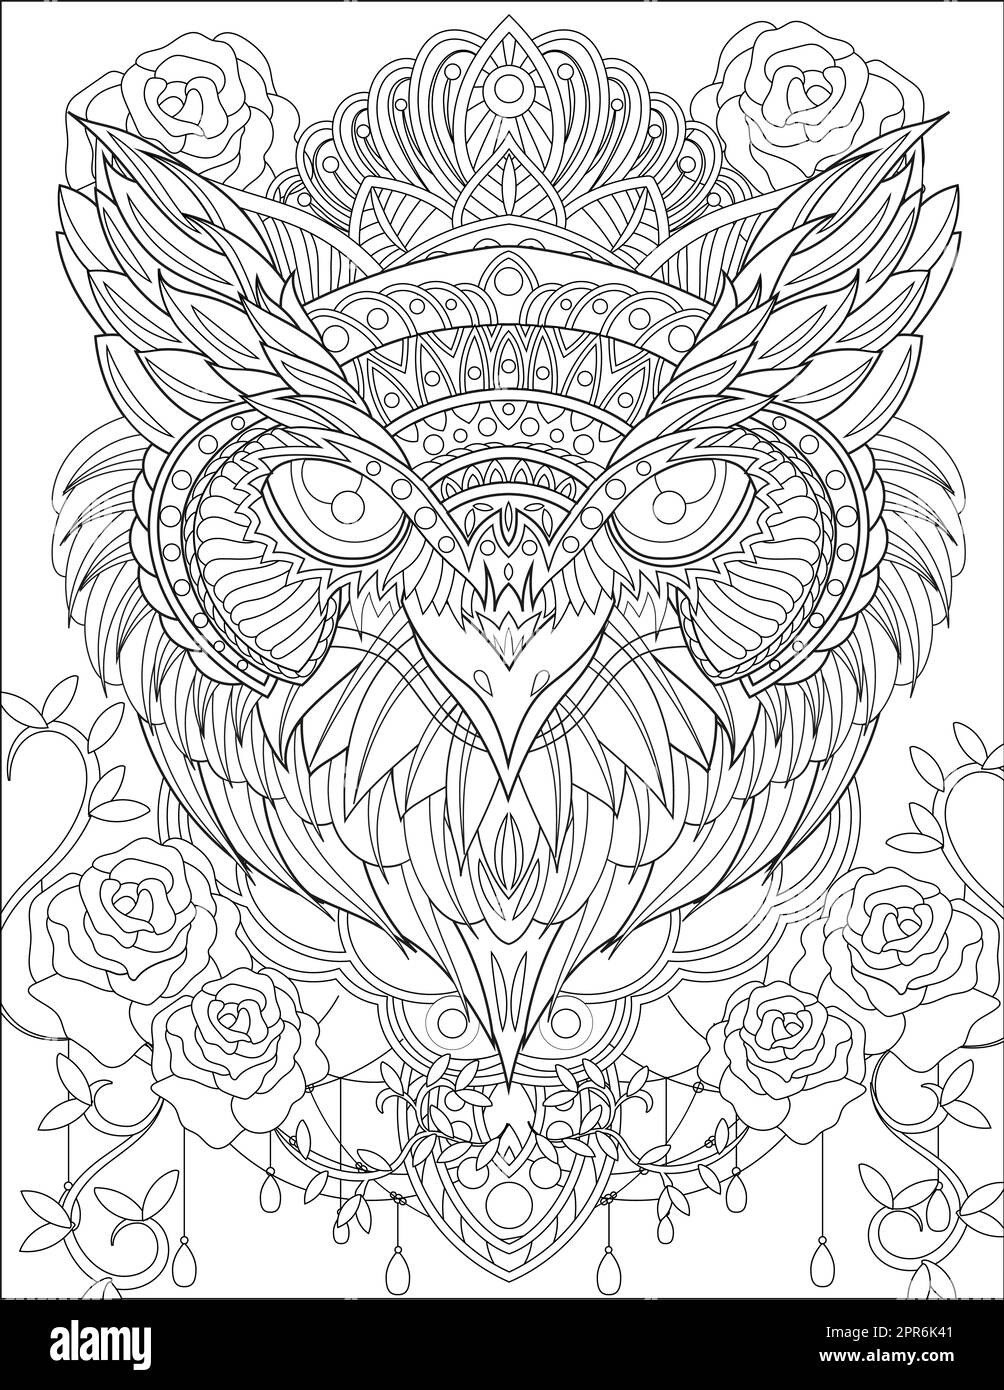 Close Up Owl Head With Crown Surrounding Rose Flower Vines Line Drawing. Stock Photo